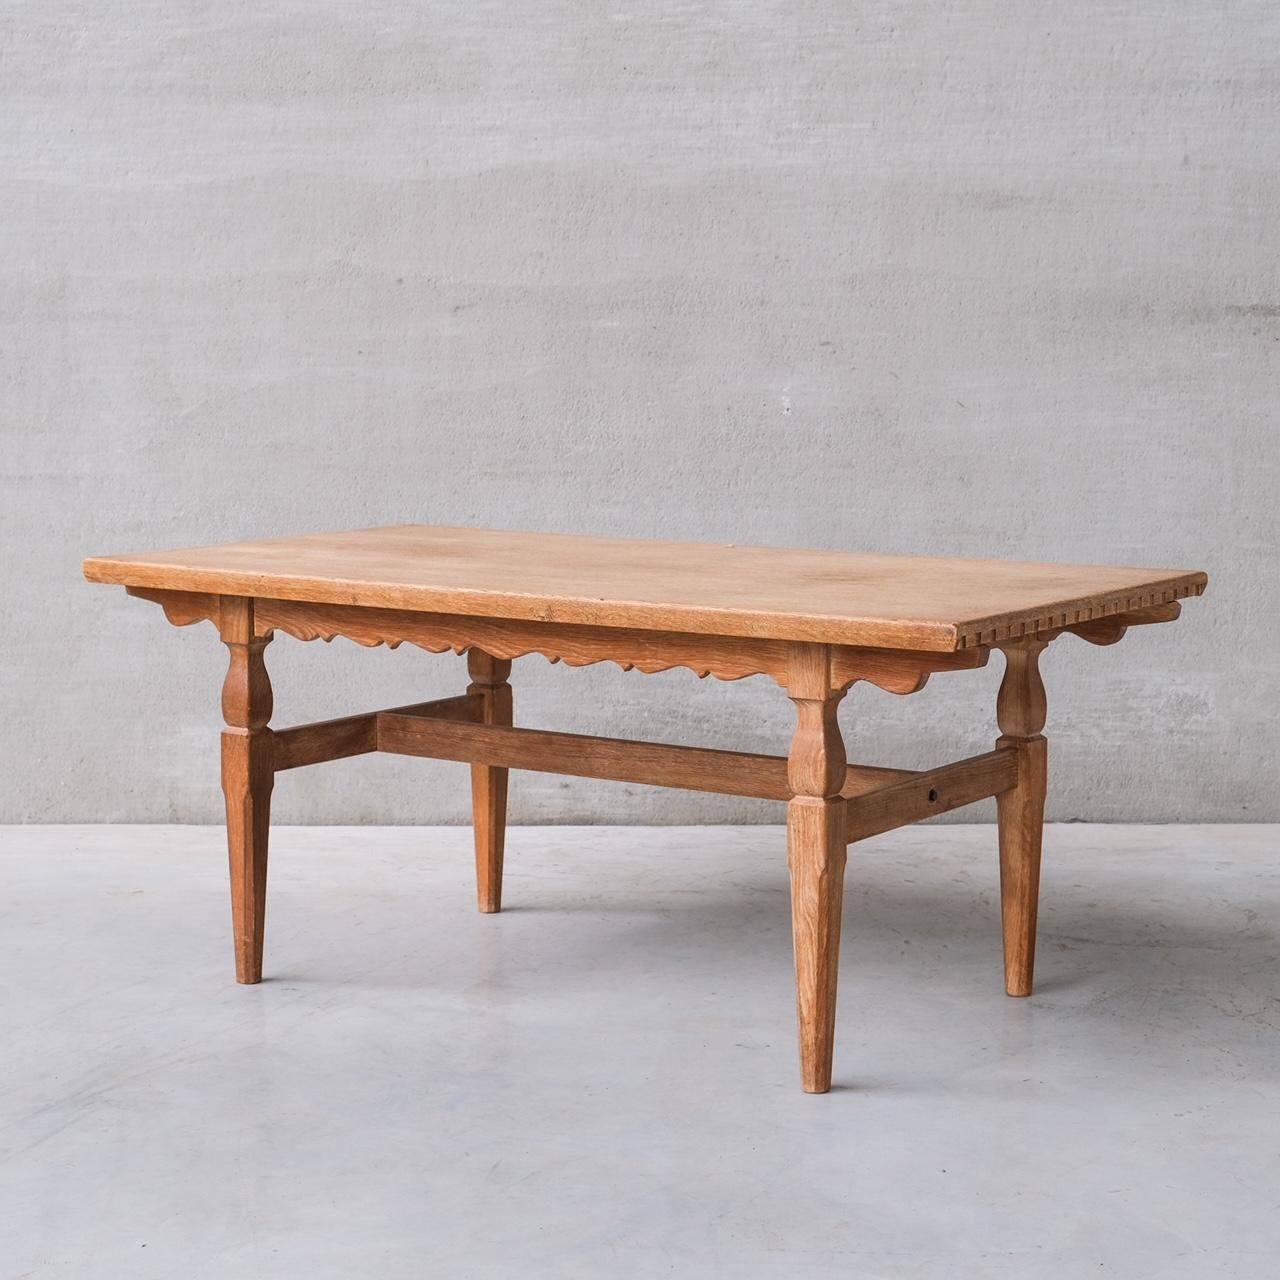 An oak dining table attr. to Henning (Henry) Kjaernulf.

Denmark, c1960s.

Two extensions provided which extends to a total of 268 W in cm.

Dimensions below are without the leaves.

Good vintage condition, some scuffs and wear commensurate with